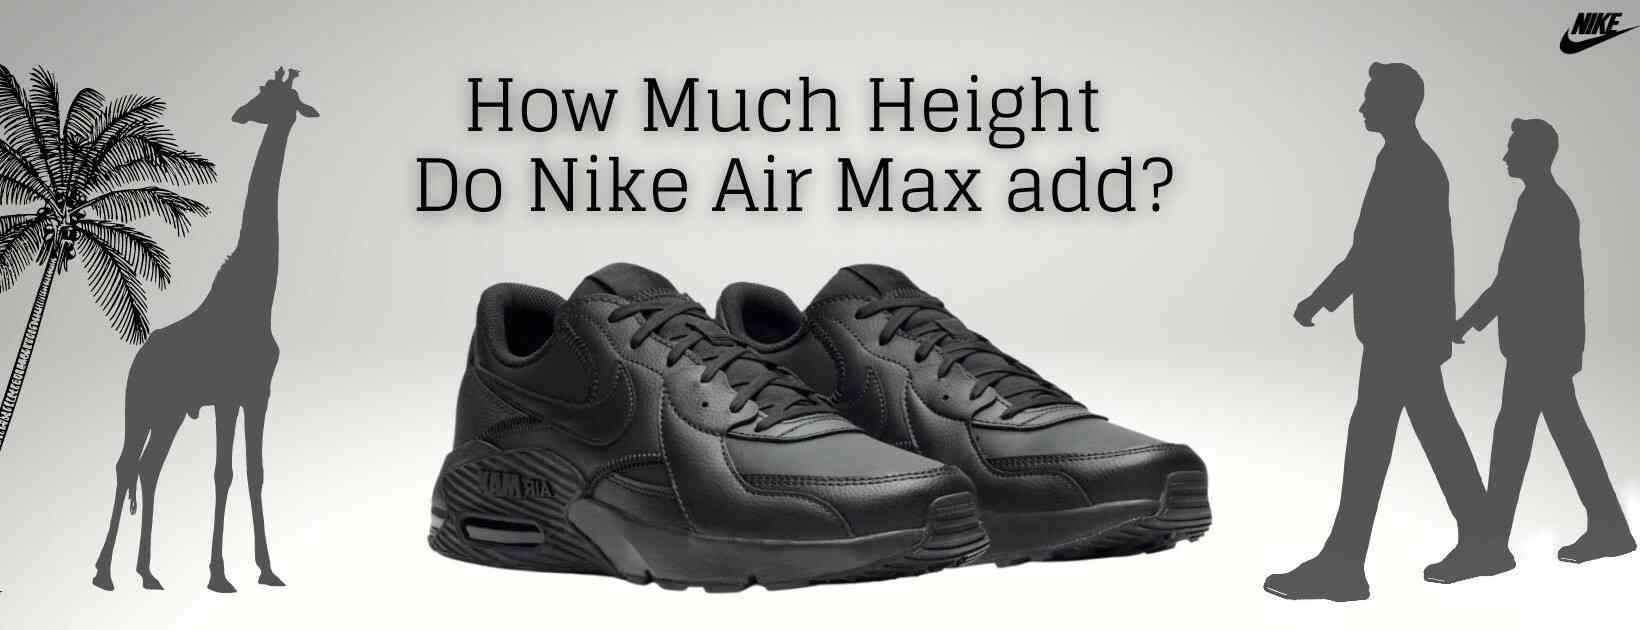 chat Dent Hen How Much Height Do Nike Air Max Add? (Complete Guide)